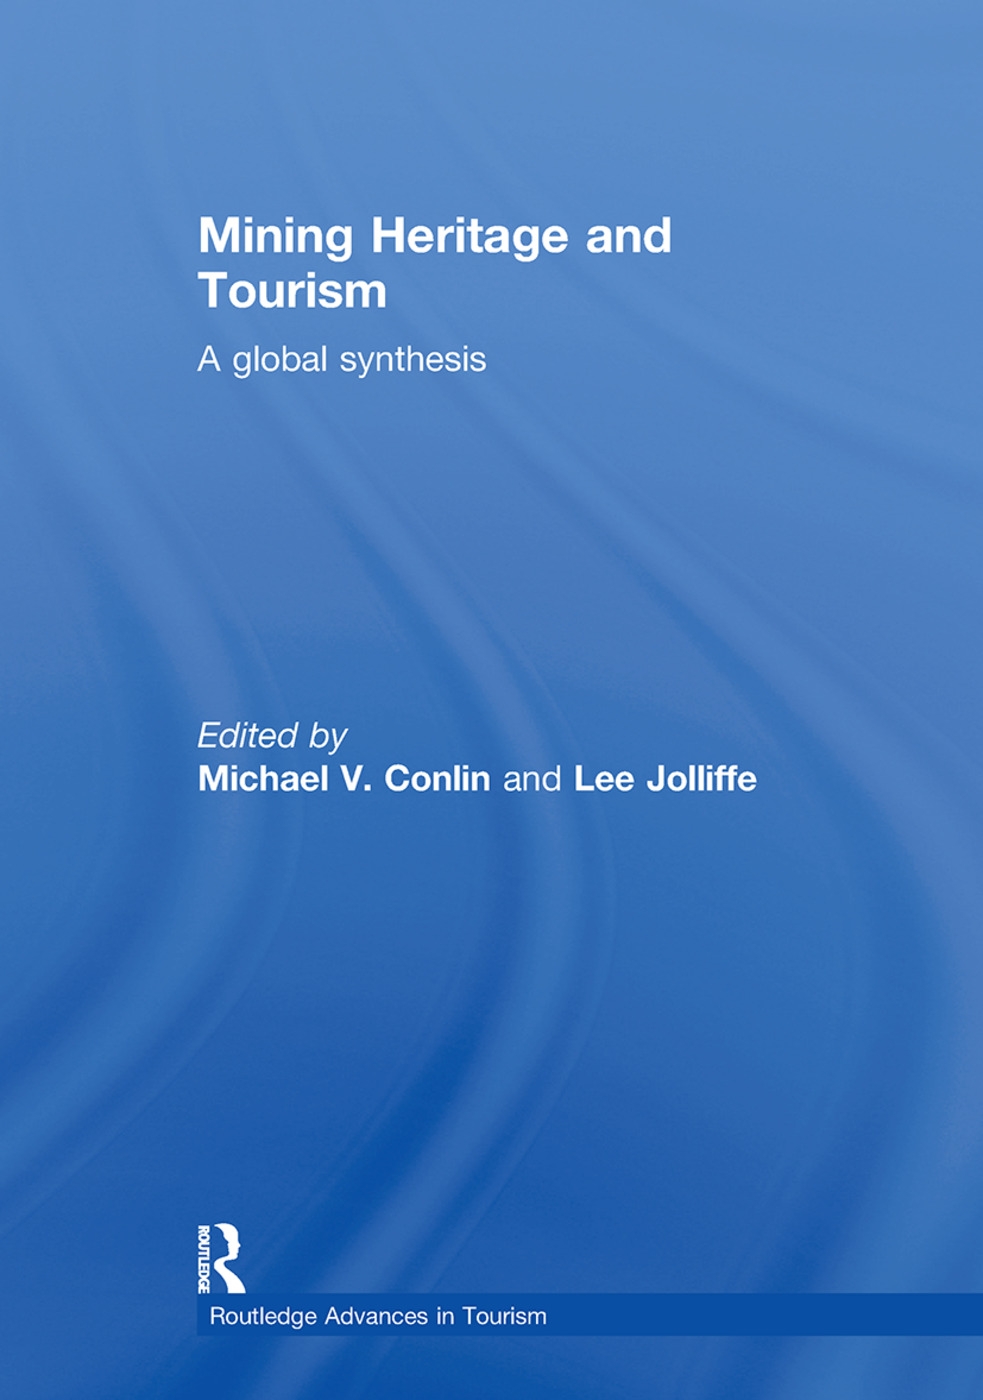 Mining Heritage and Tourism: A Global Synthesis